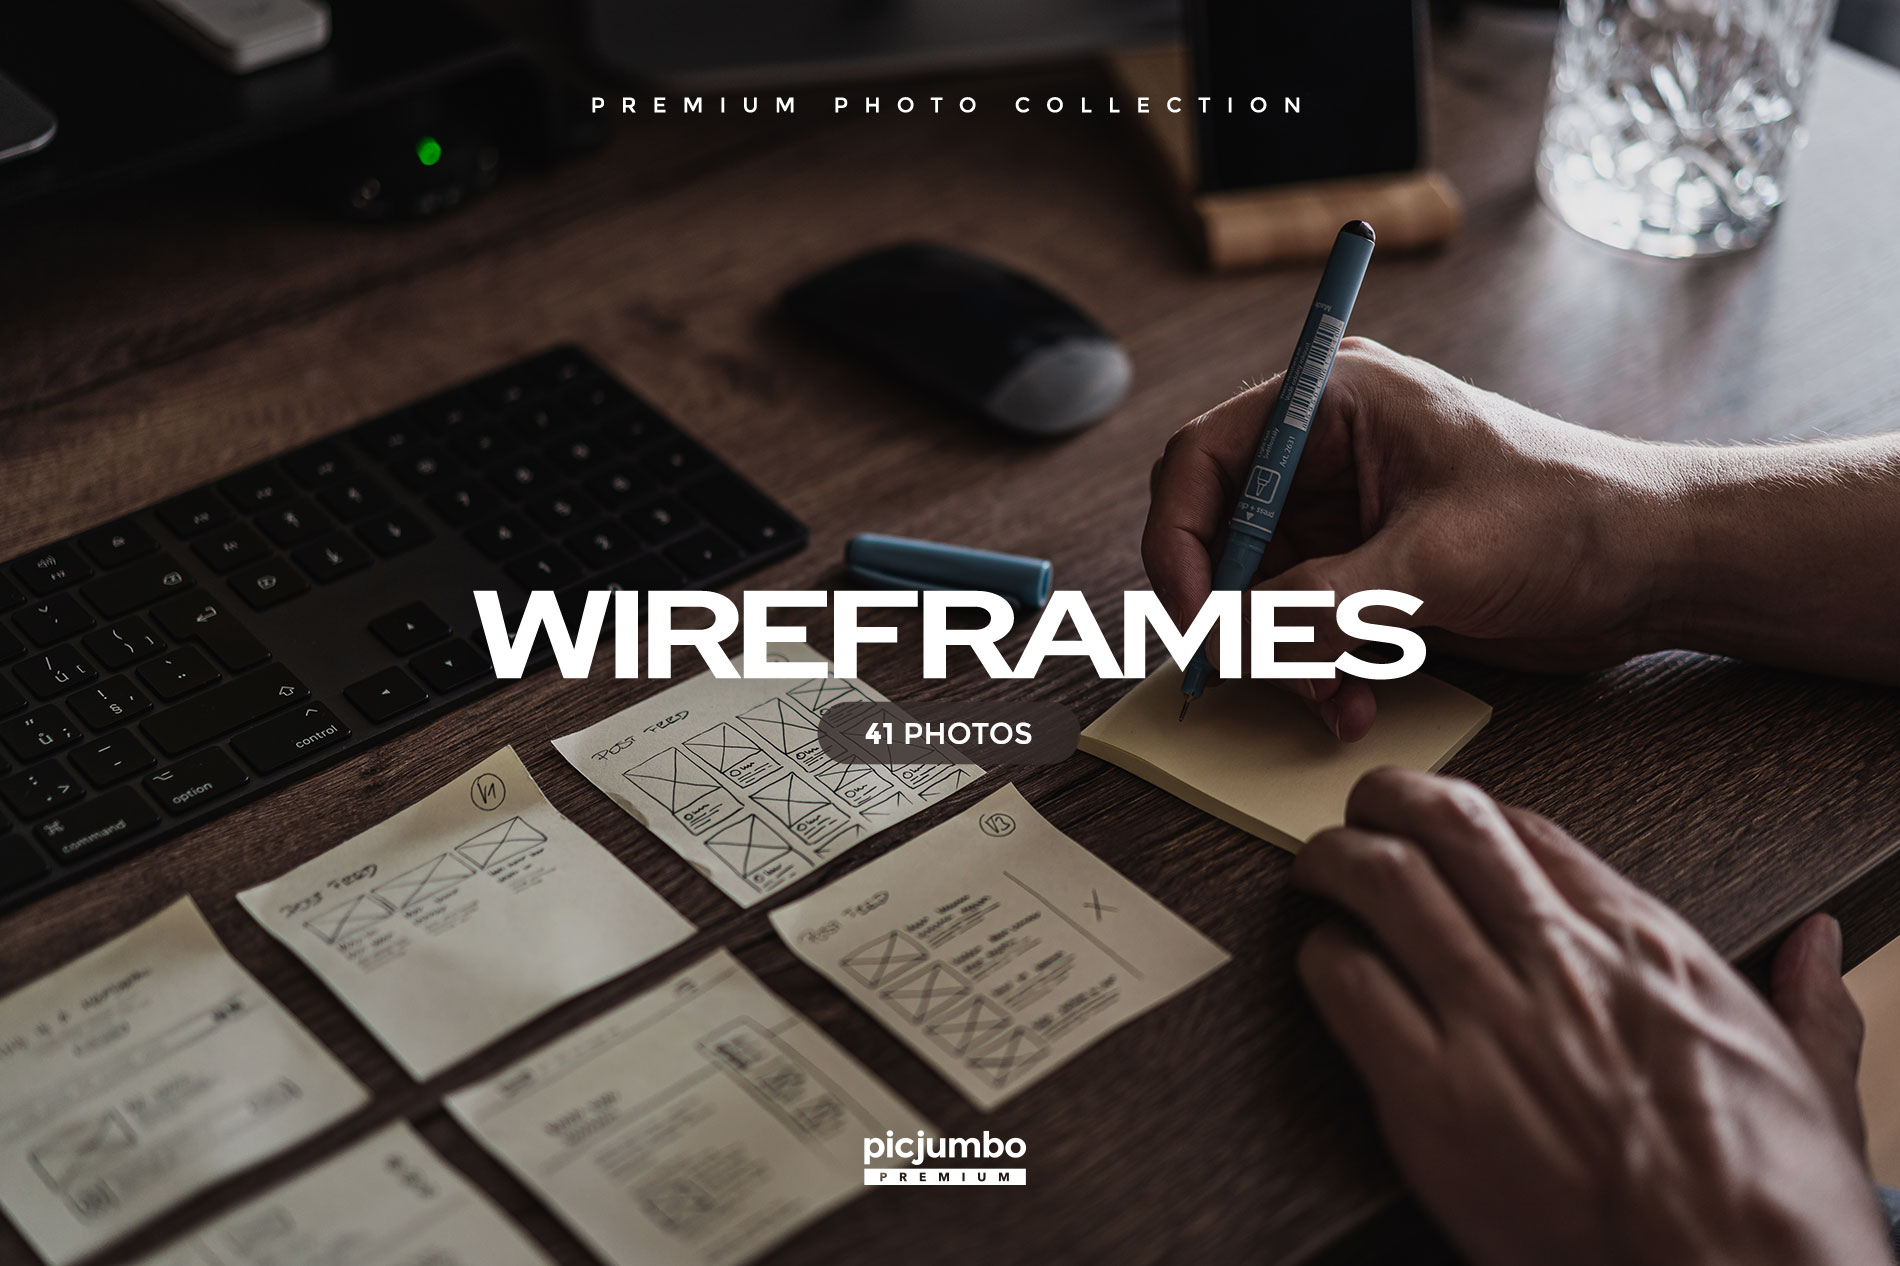 Download hi-res stock photos from our Wireframes PREMIUM Collection!